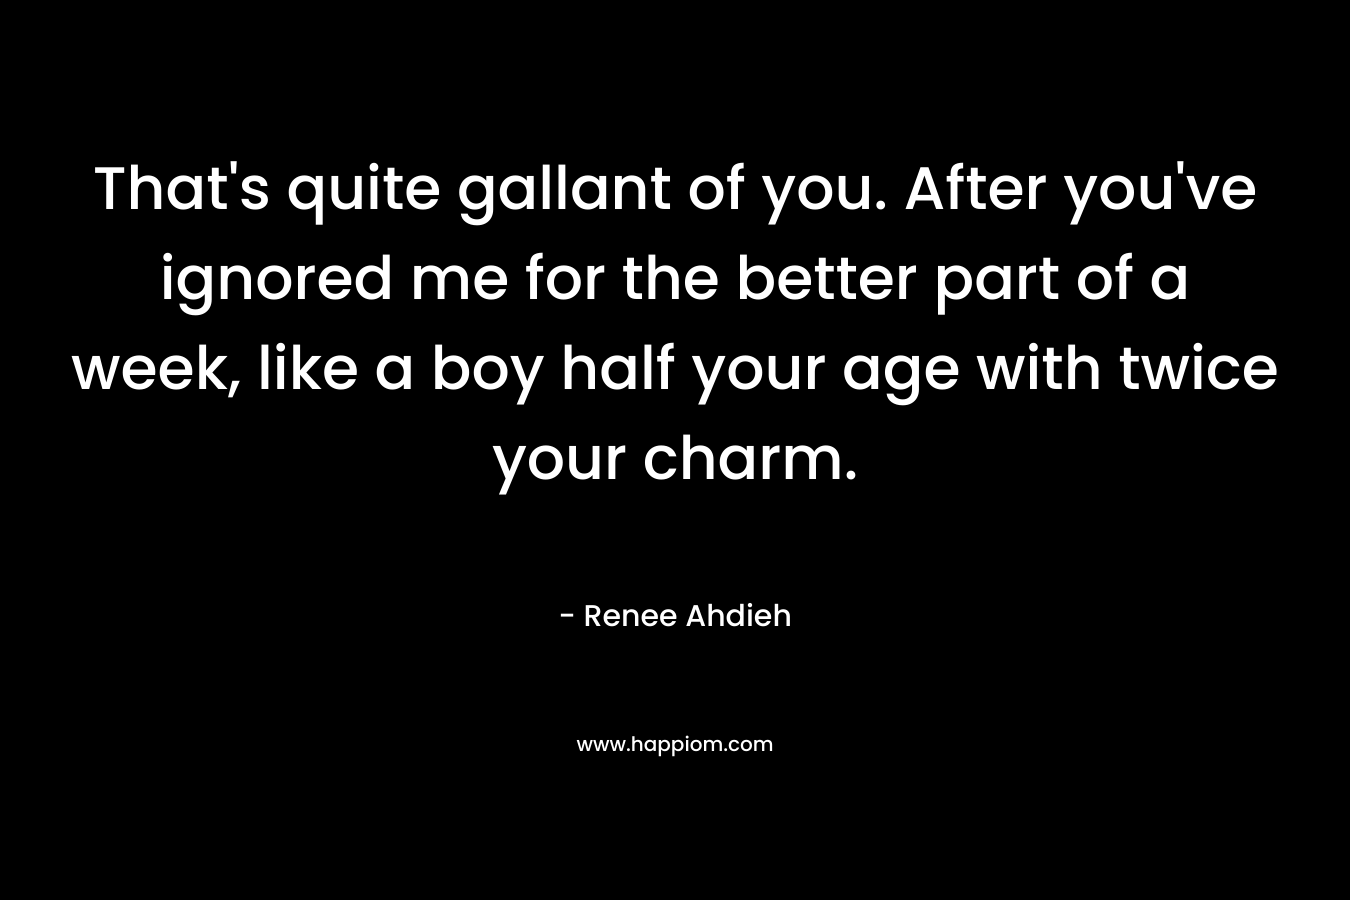 That’s quite gallant of you. After you’ve ignored me for the better part of a week, like a boy half your age with twice your charm. – Renee Ahdieh